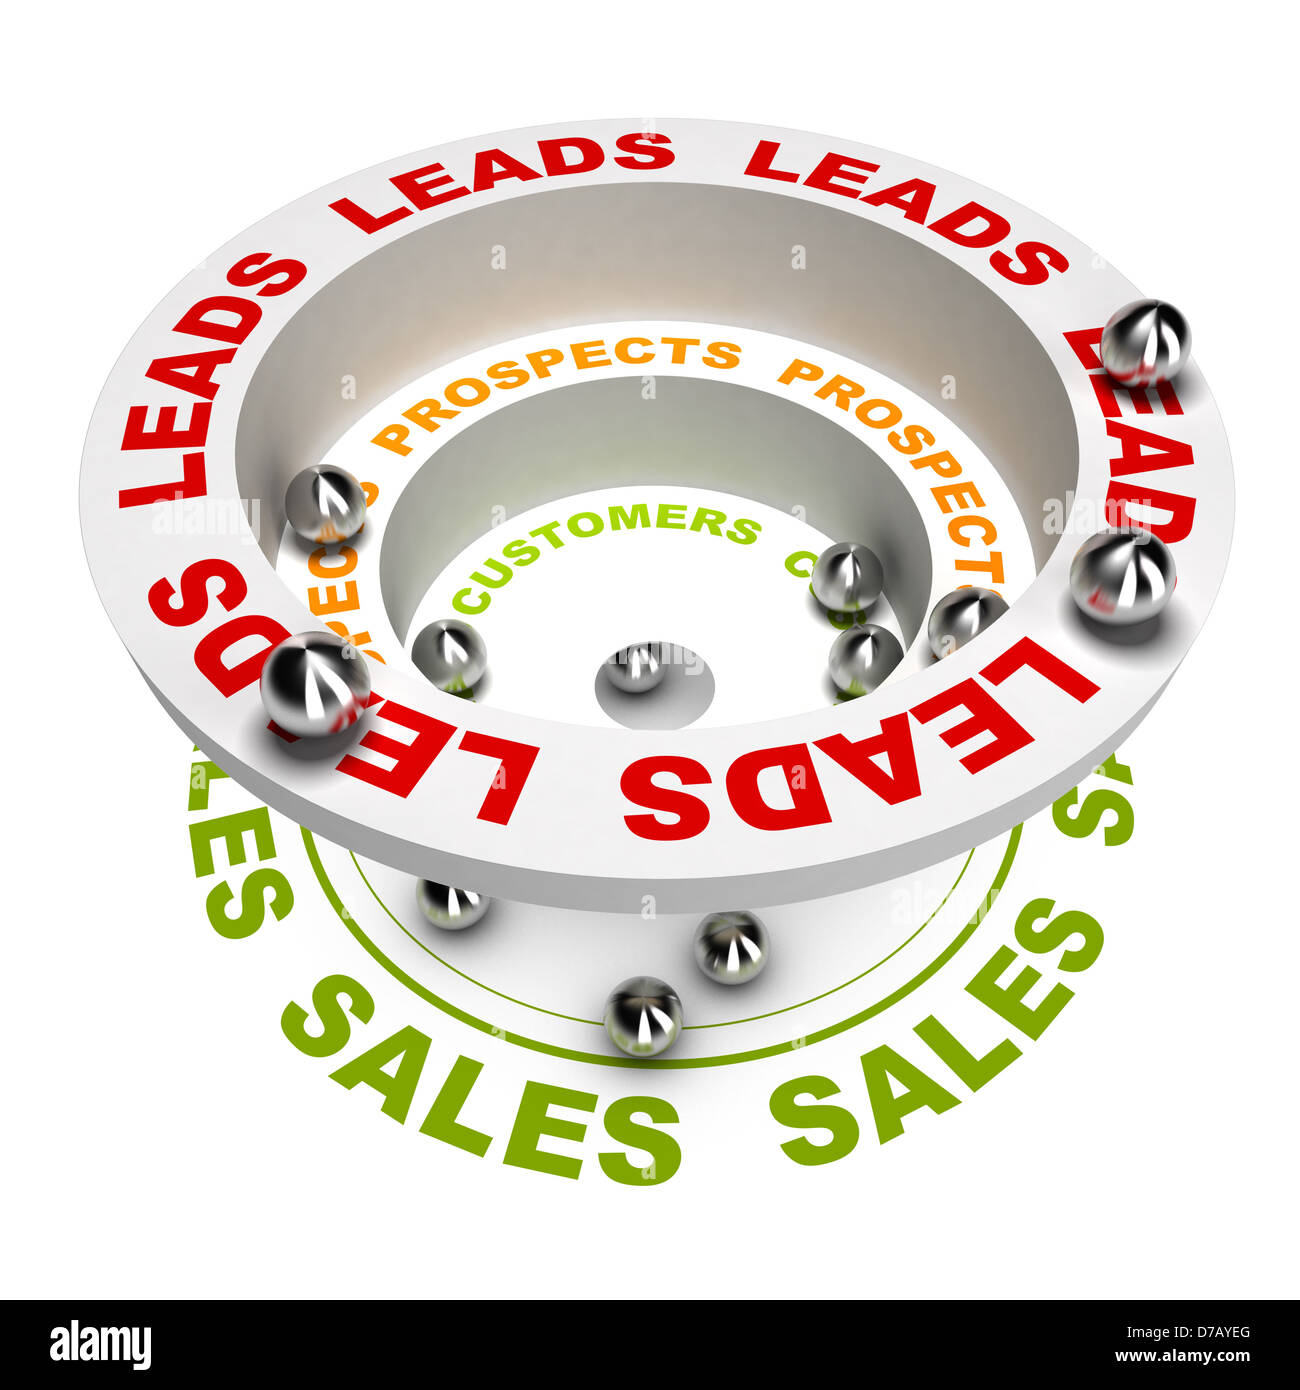 3D render illustration of the sales process or how to concert leads into sales, white background Stock Photo